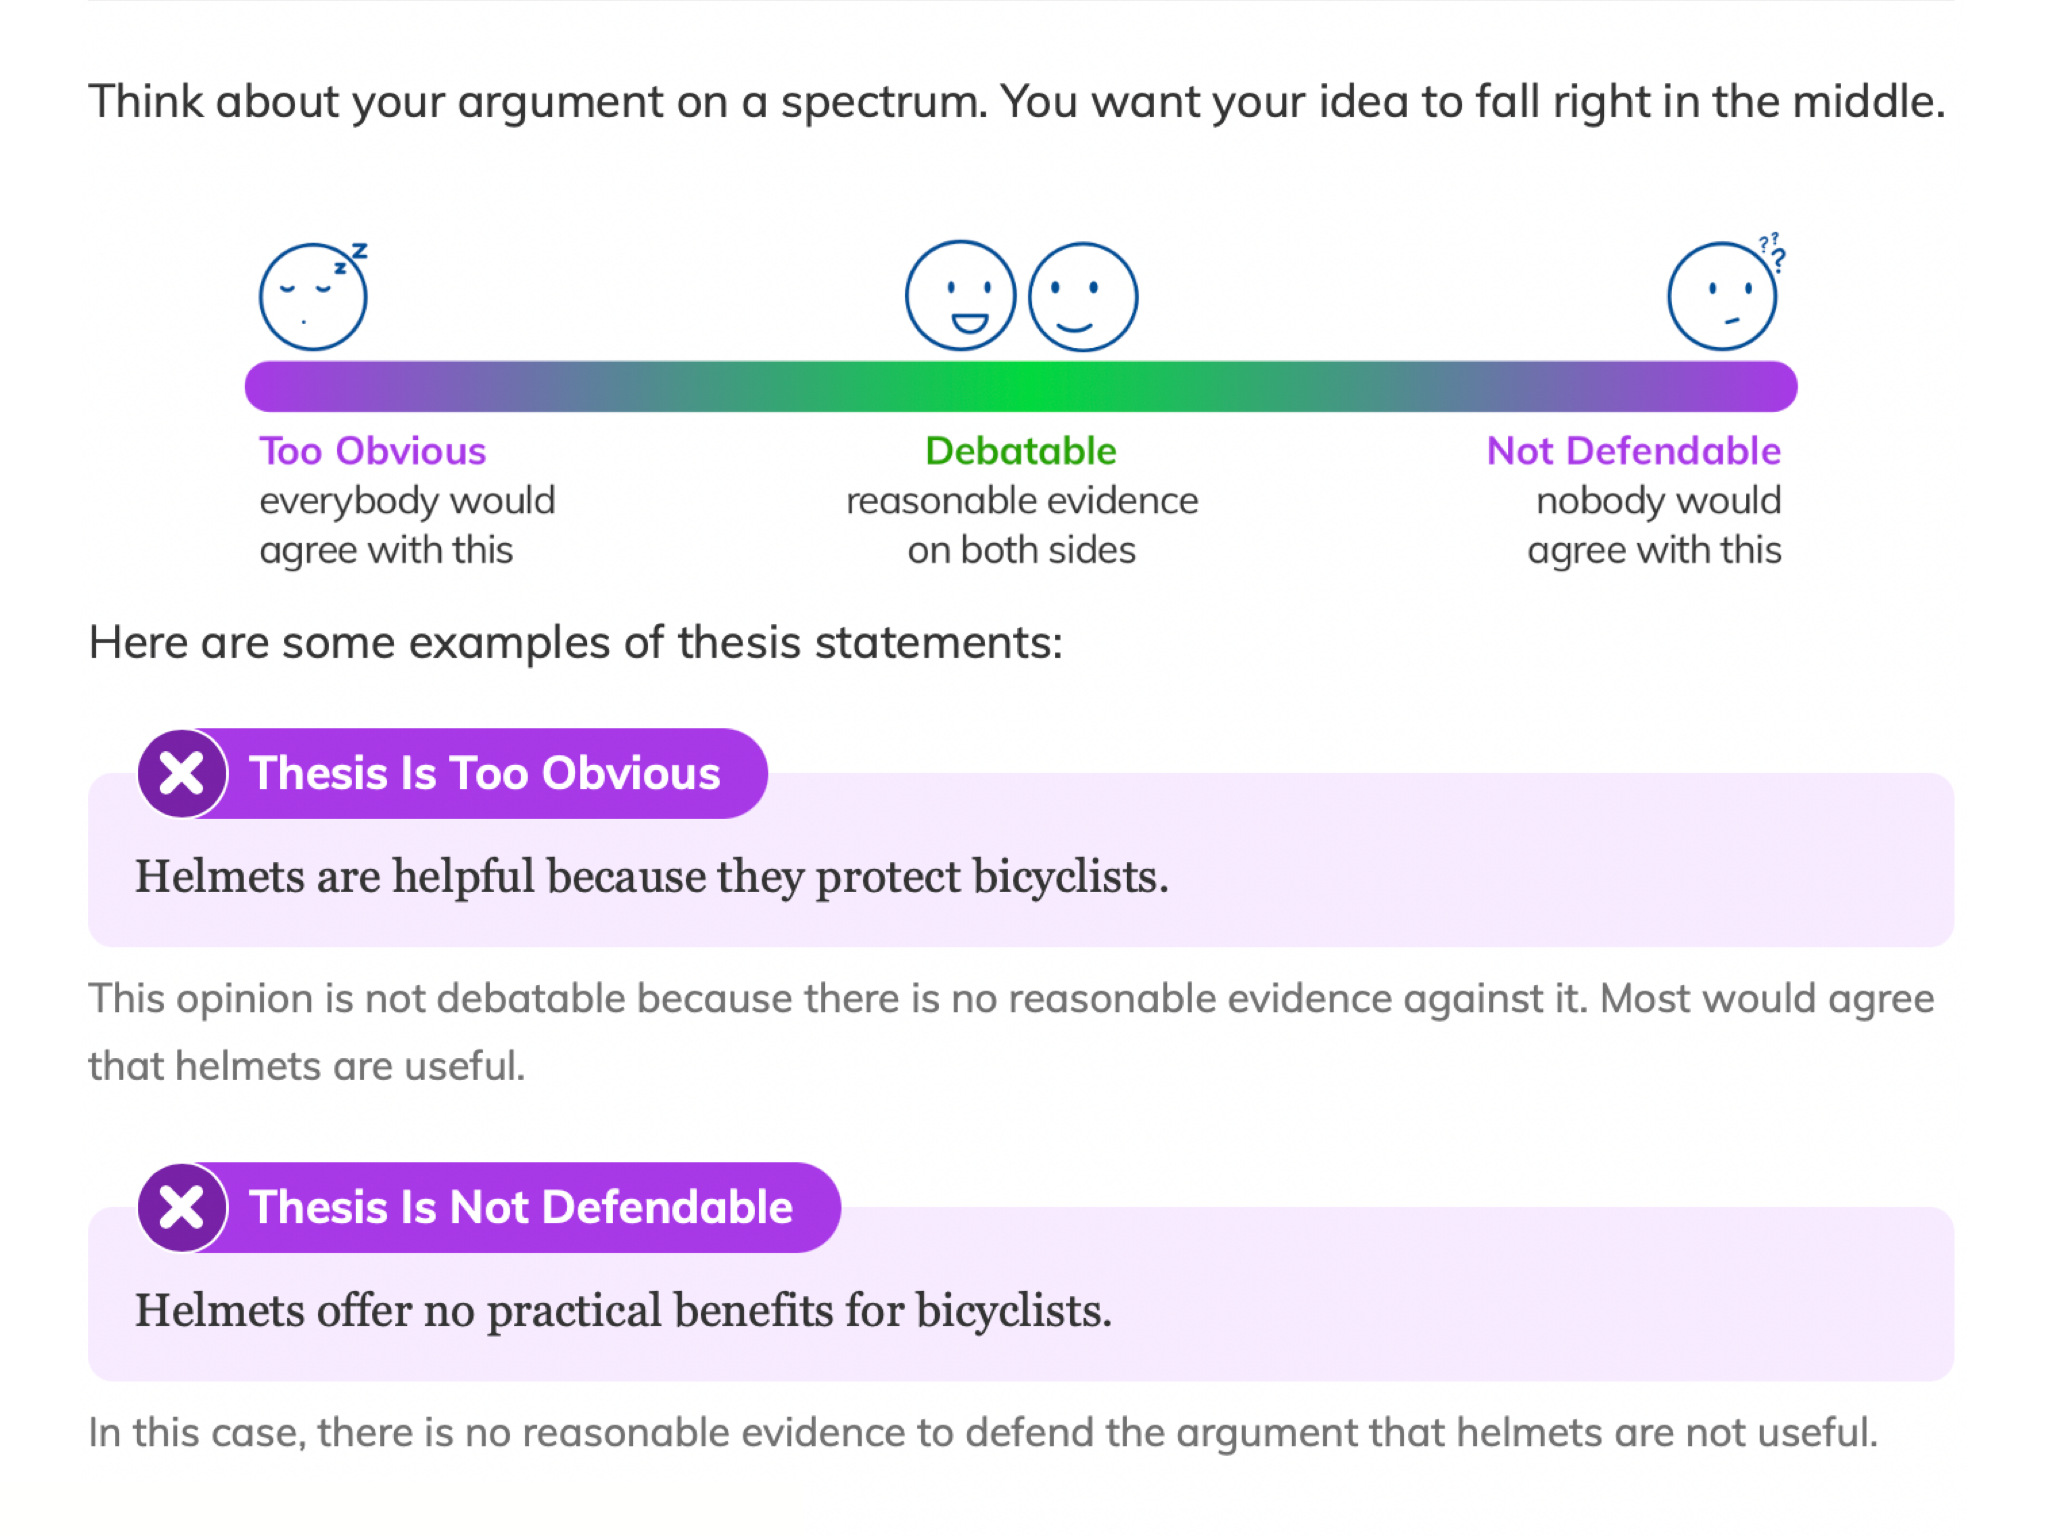 Students see guidance for writing thesis statements such as, “Think about your argument on a spectrum. You want your idea to fall right in the middle.” Students see a colored scale ranging from “Too obvious” to “Defendable” to “Not defendable,” with iconography and explanations to help reinforce each characteristic.